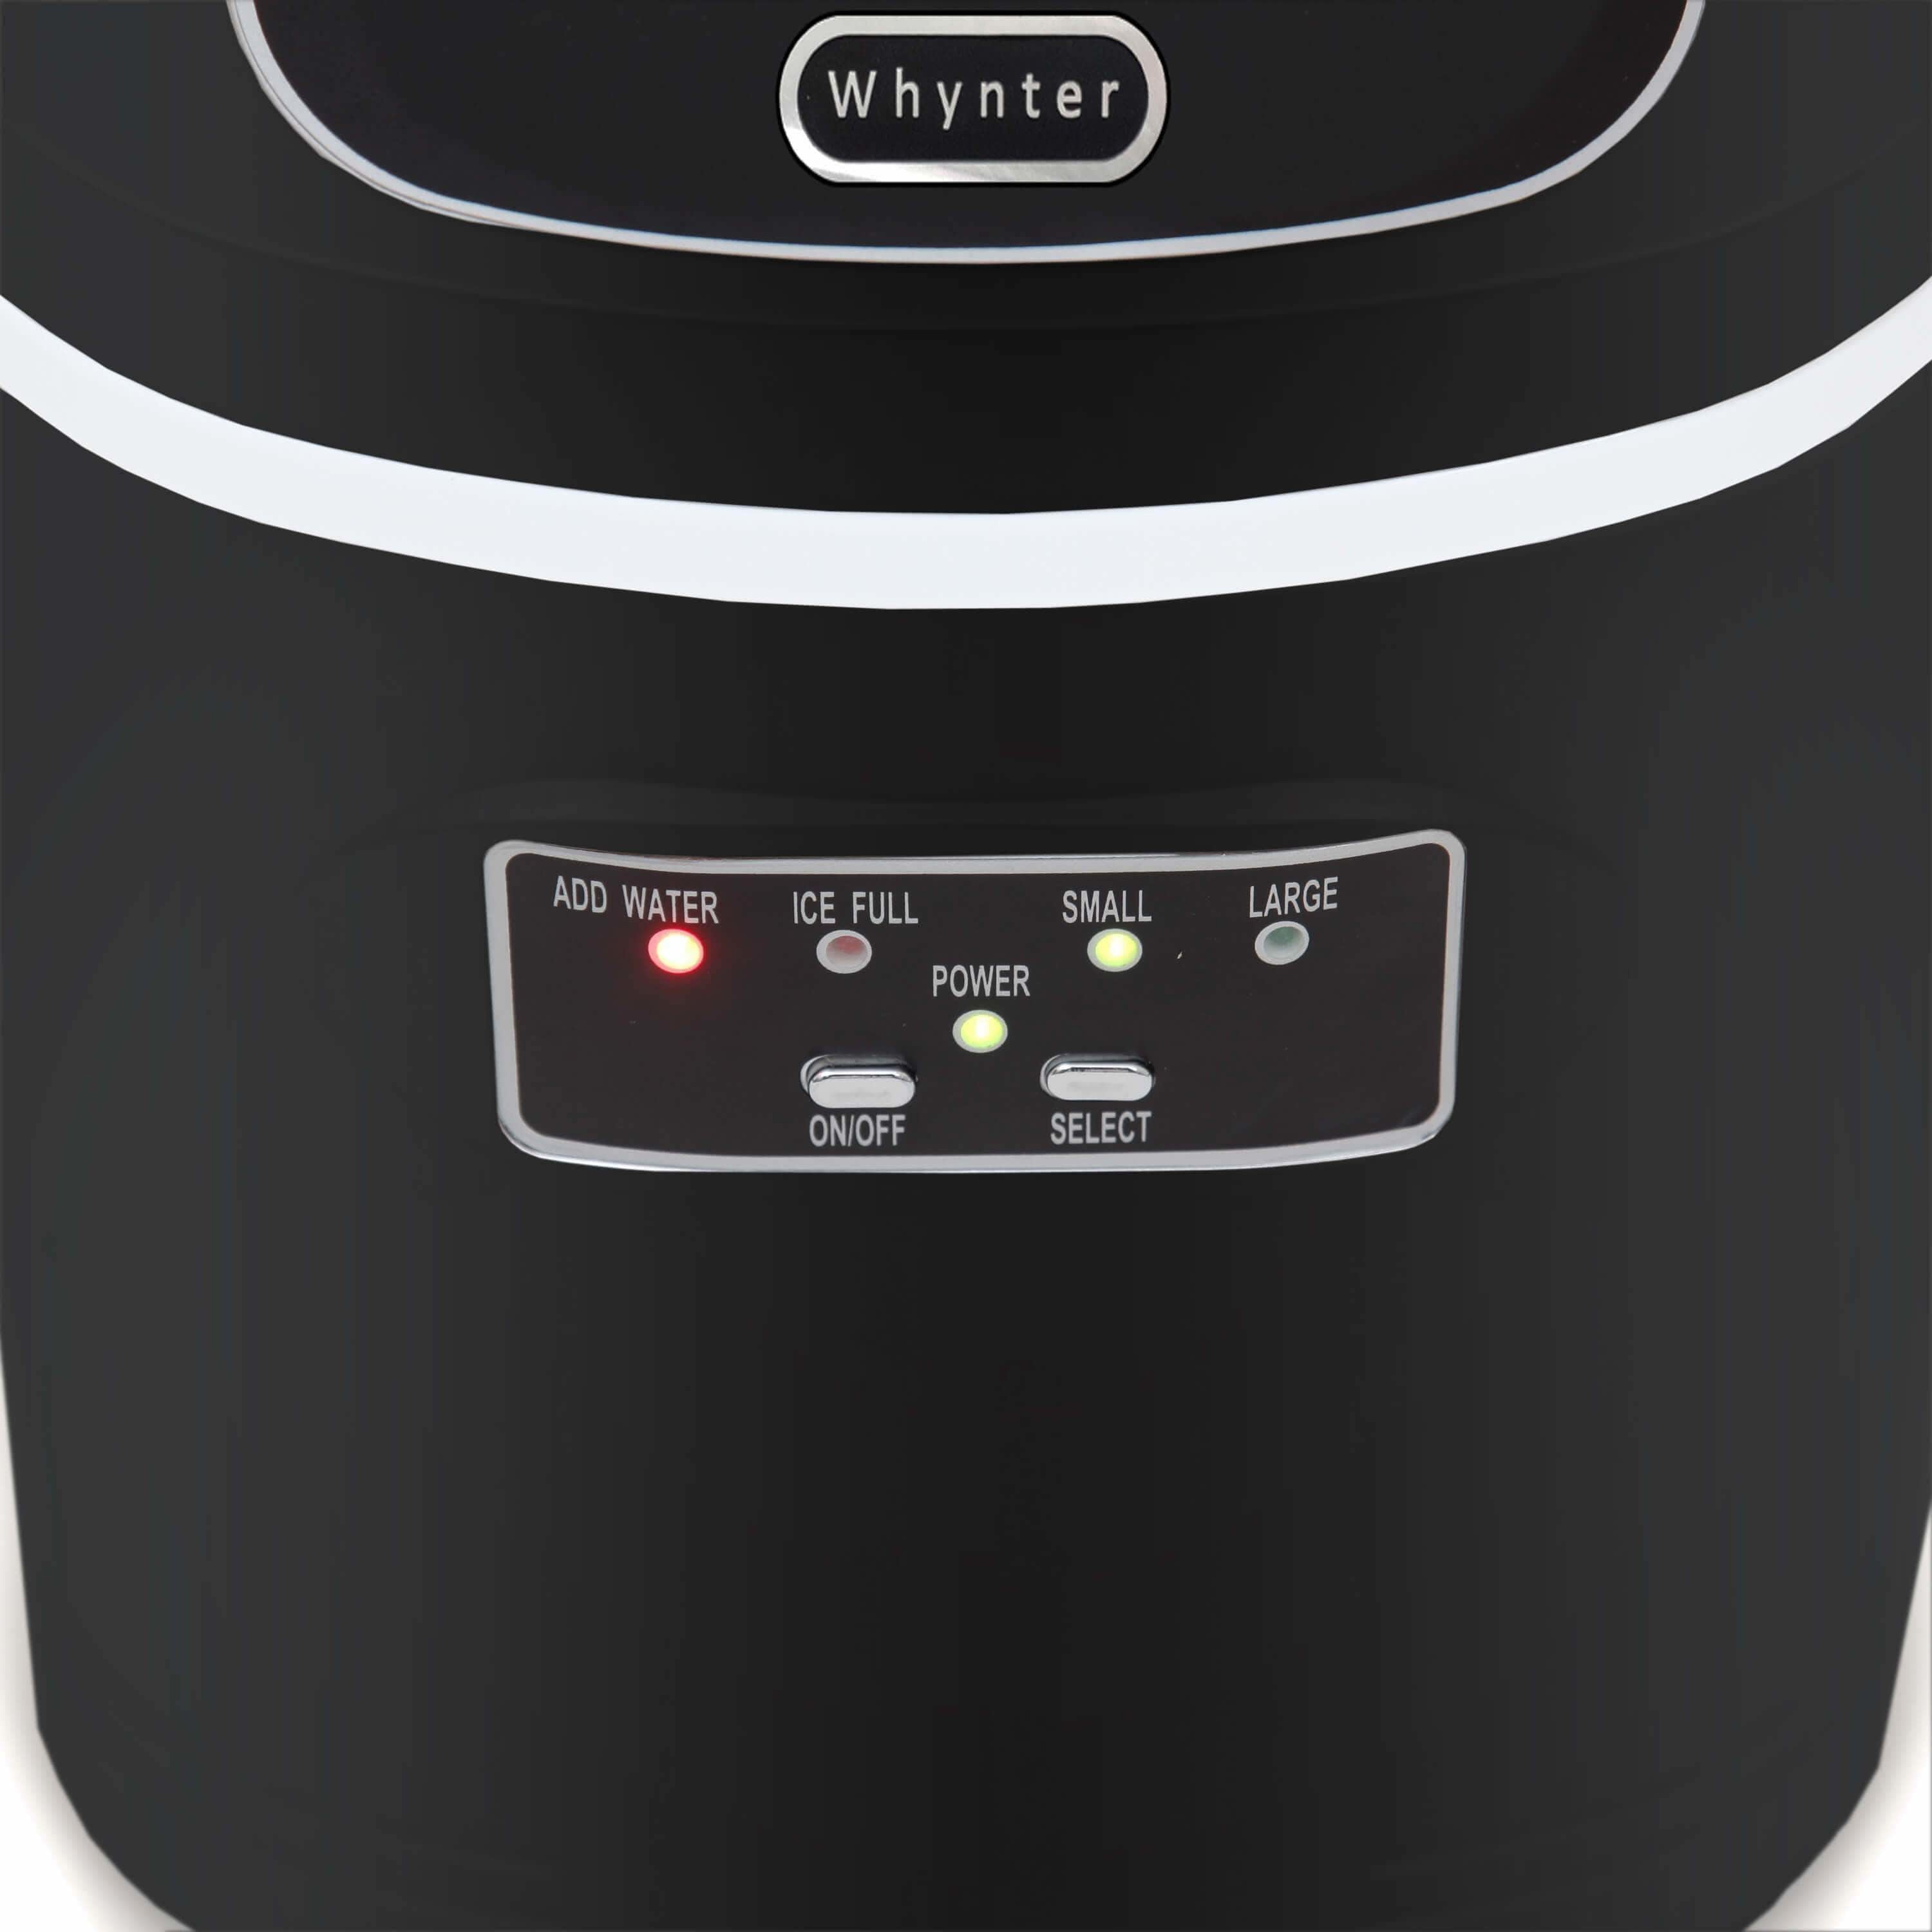 Whynter Compact Portable Ice Maker 27 lb capacity Black IMC-270MB Wine Coolers Empire